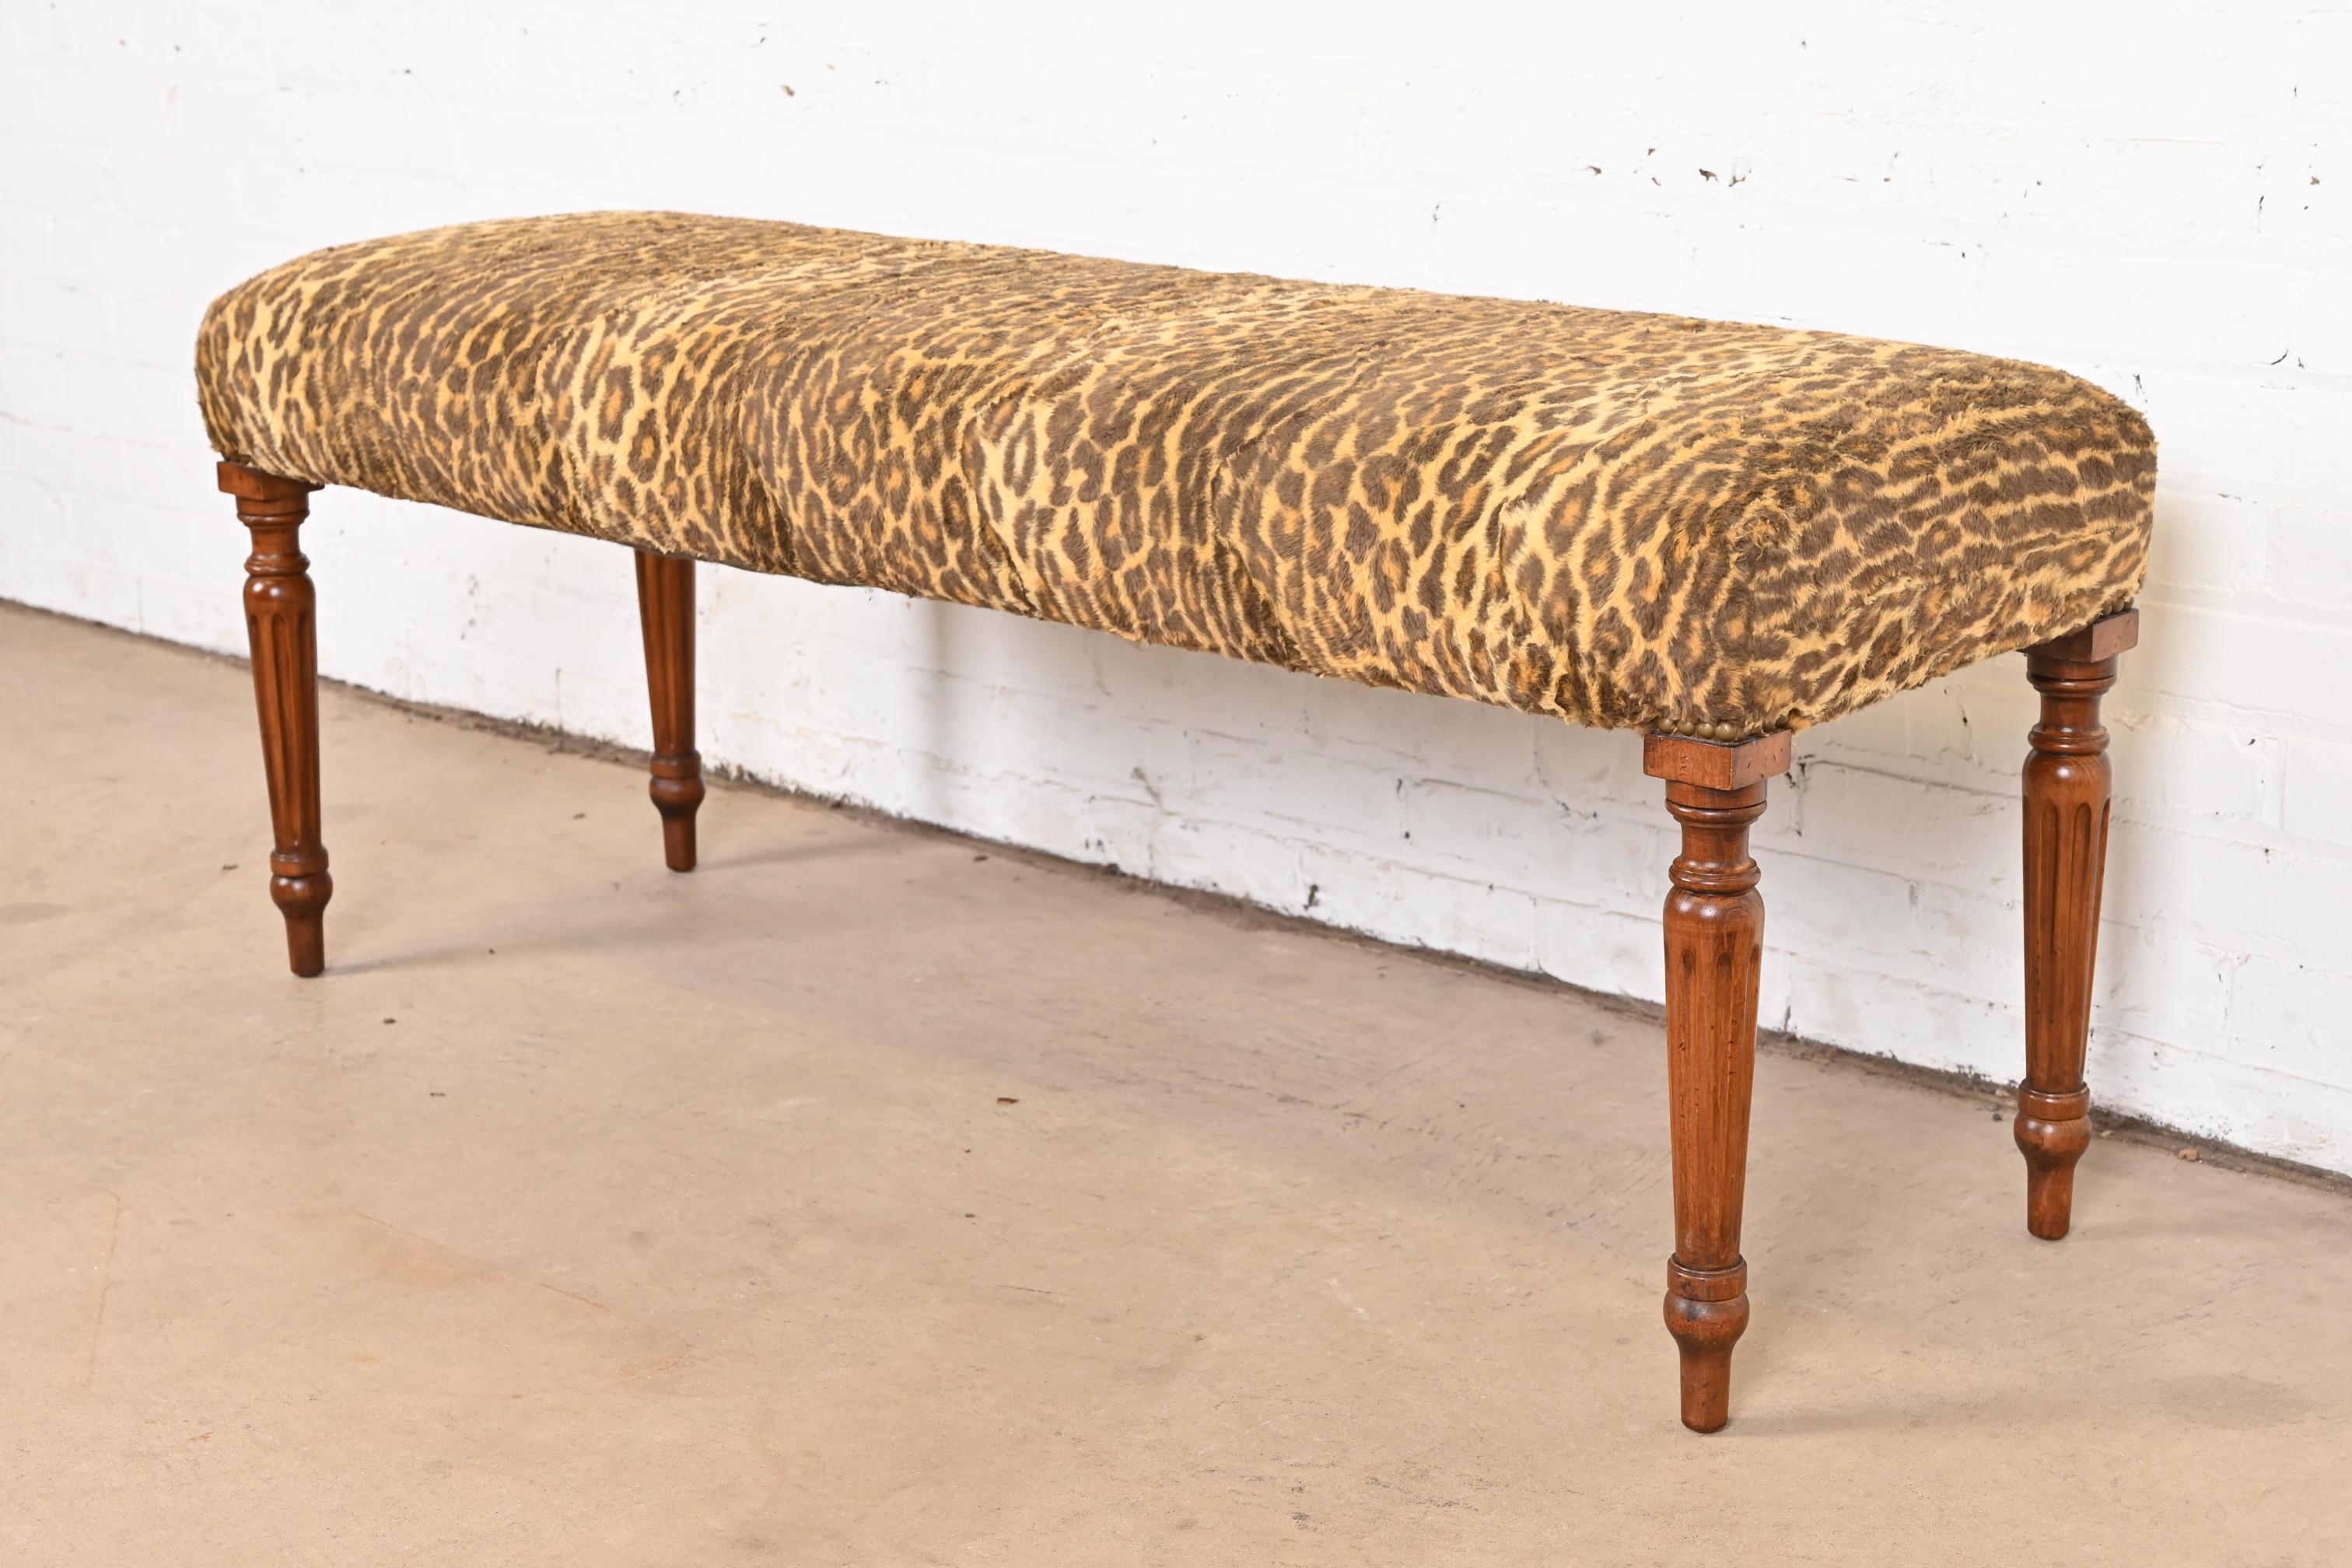 A gorgeous French Regency Louis XVI style window bench or foot-of-bed bench

By Ralph Lauren

USA, Late 20th Century

Carved walnut legs, with leopard print upholstery.

Measures: 49